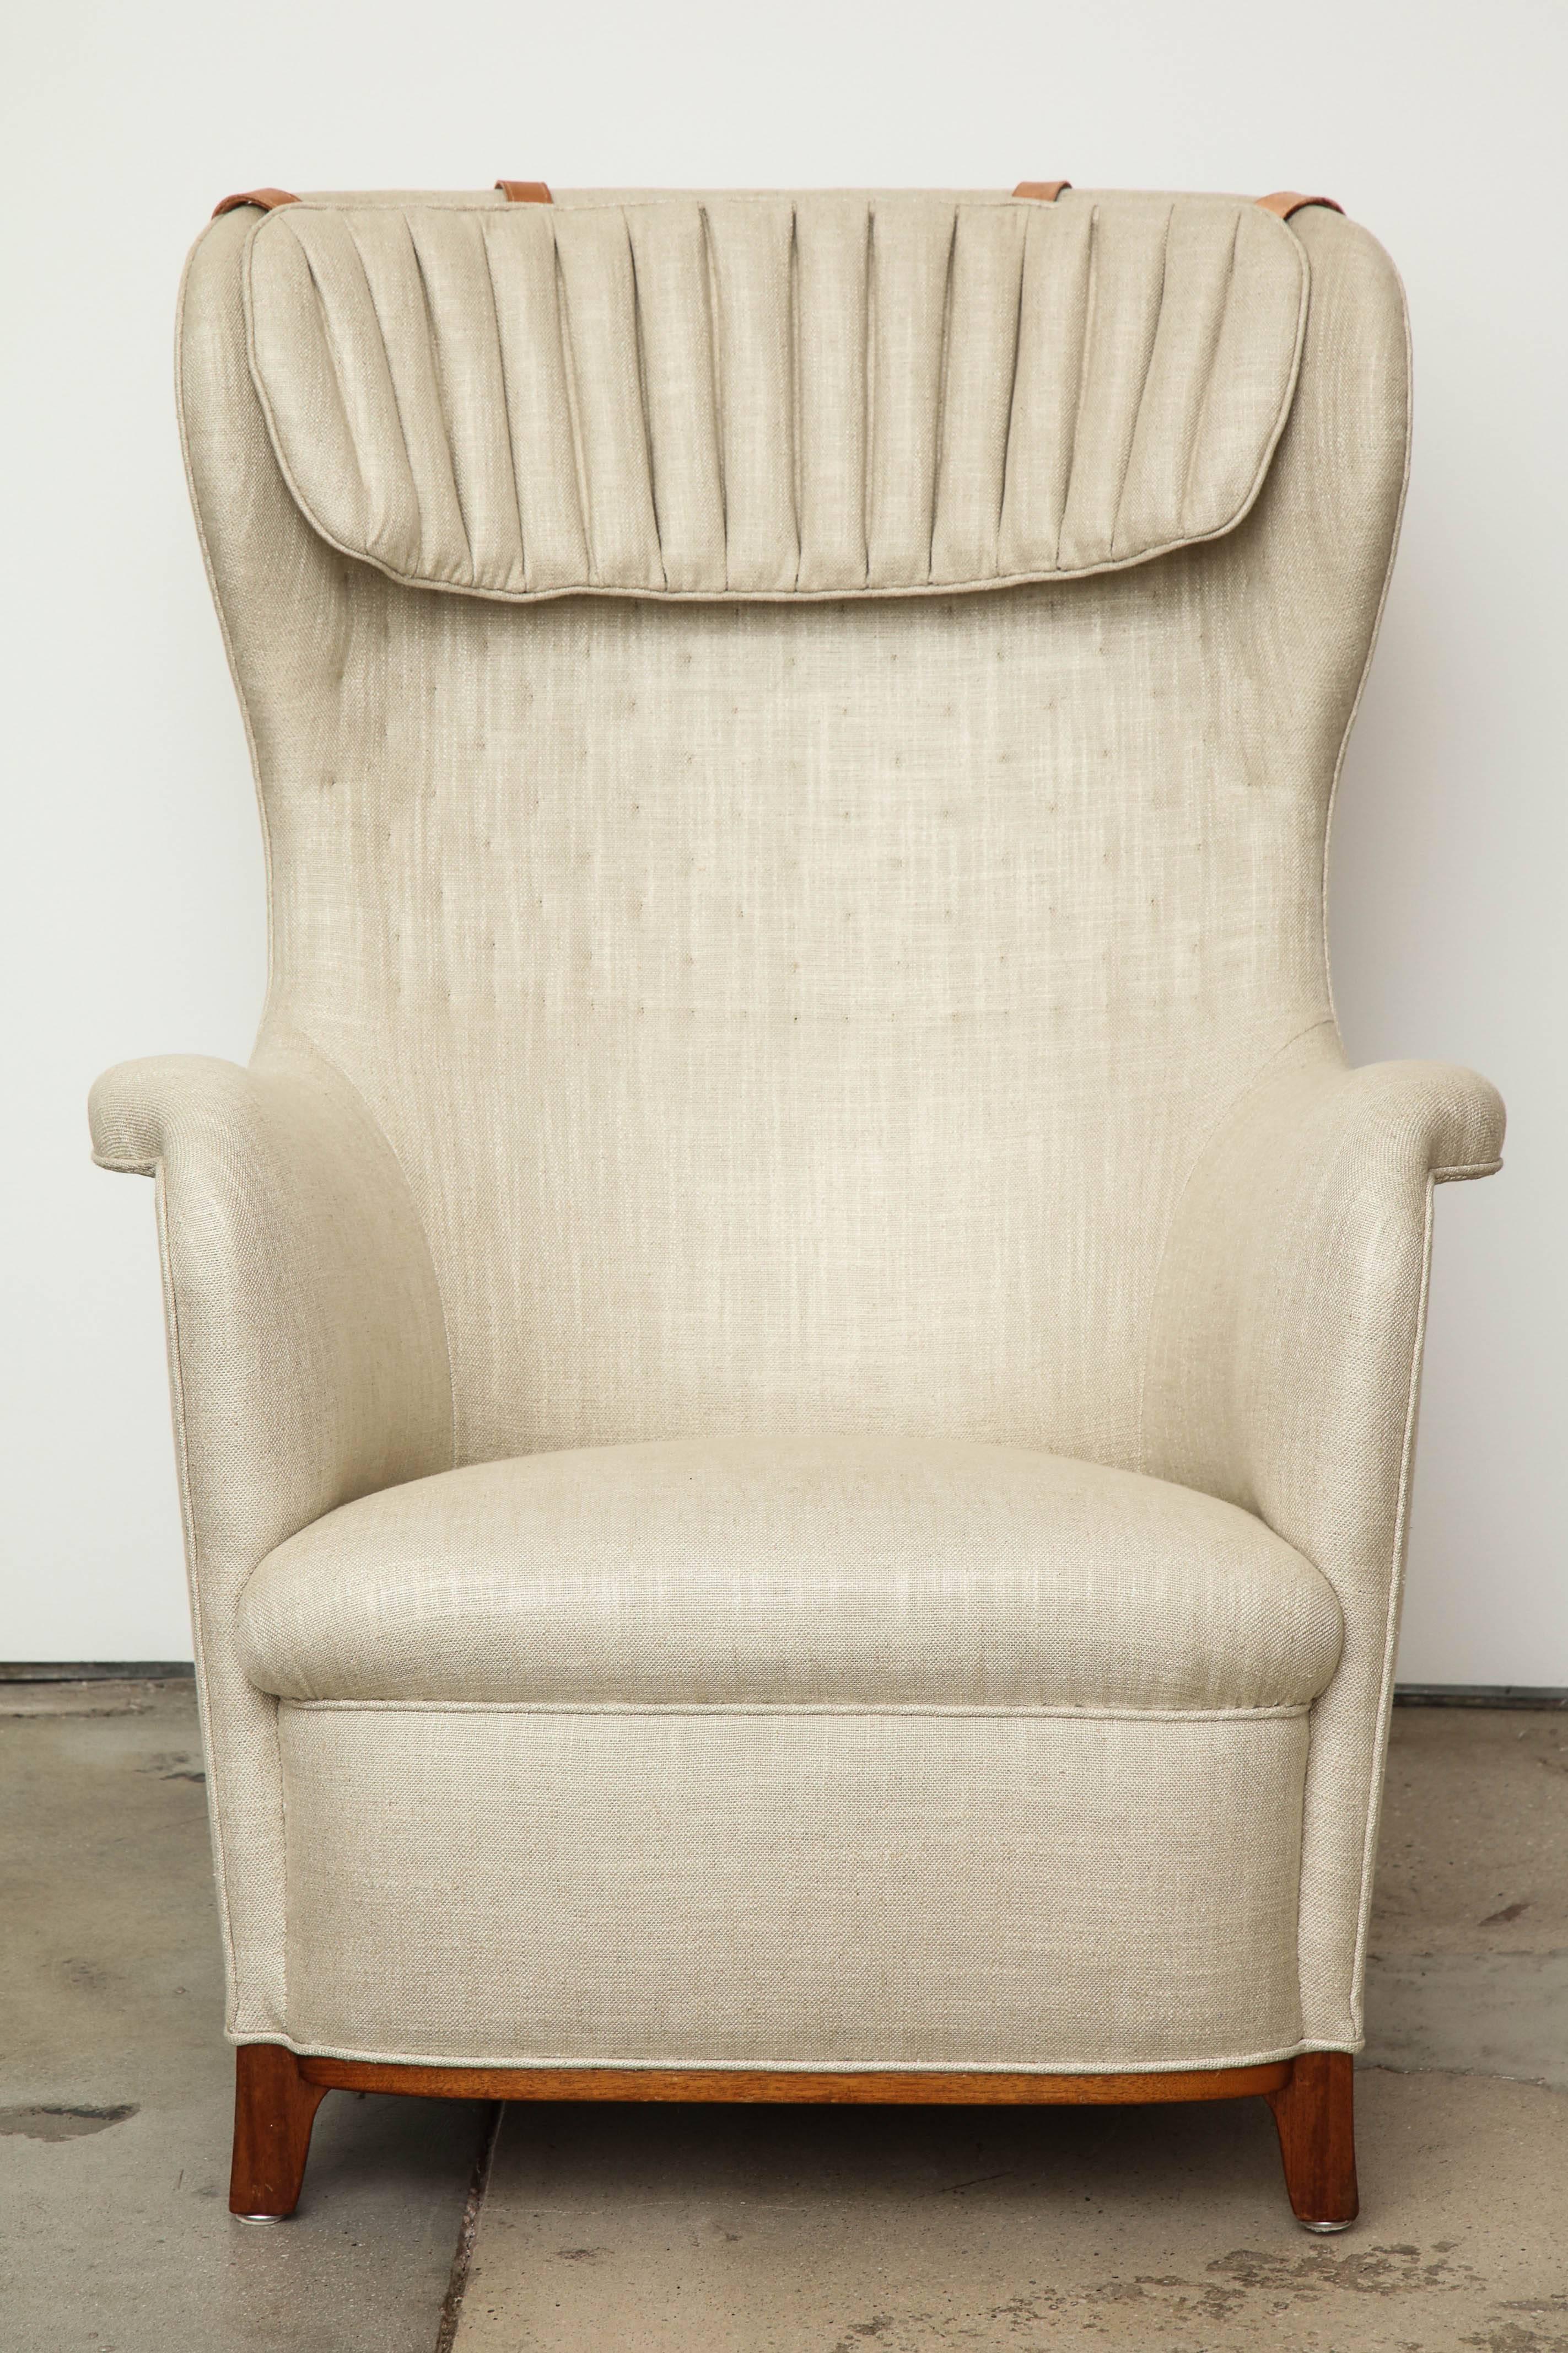 Upholstery Rare High Back Chair with Pillow by Carl Malmsten, circa 1940 For Sale